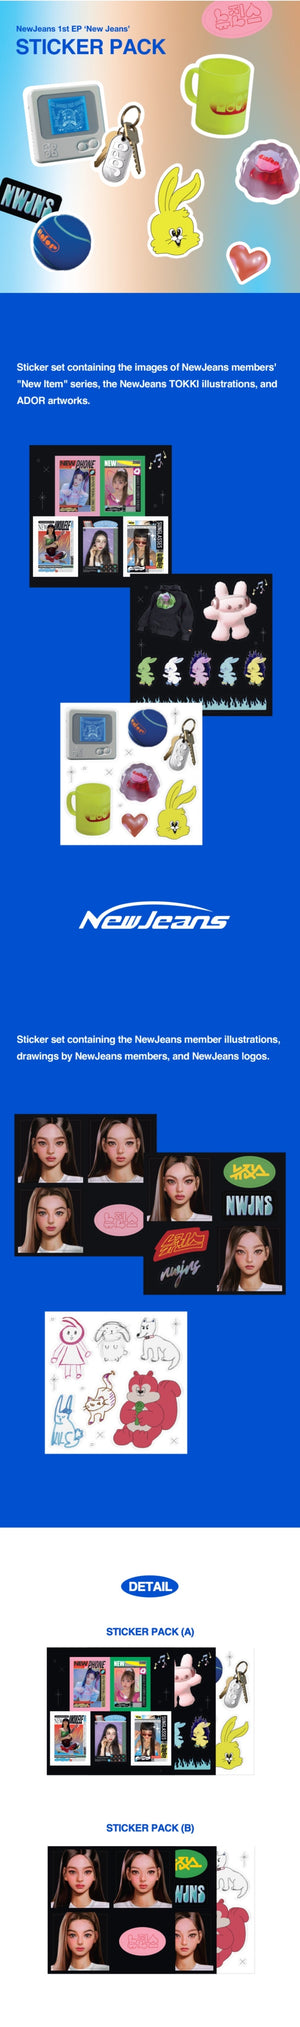 [PR] Weverse Shop MD NEW JEANS - 1ST EP NEW JEANS OFFICIAL MD